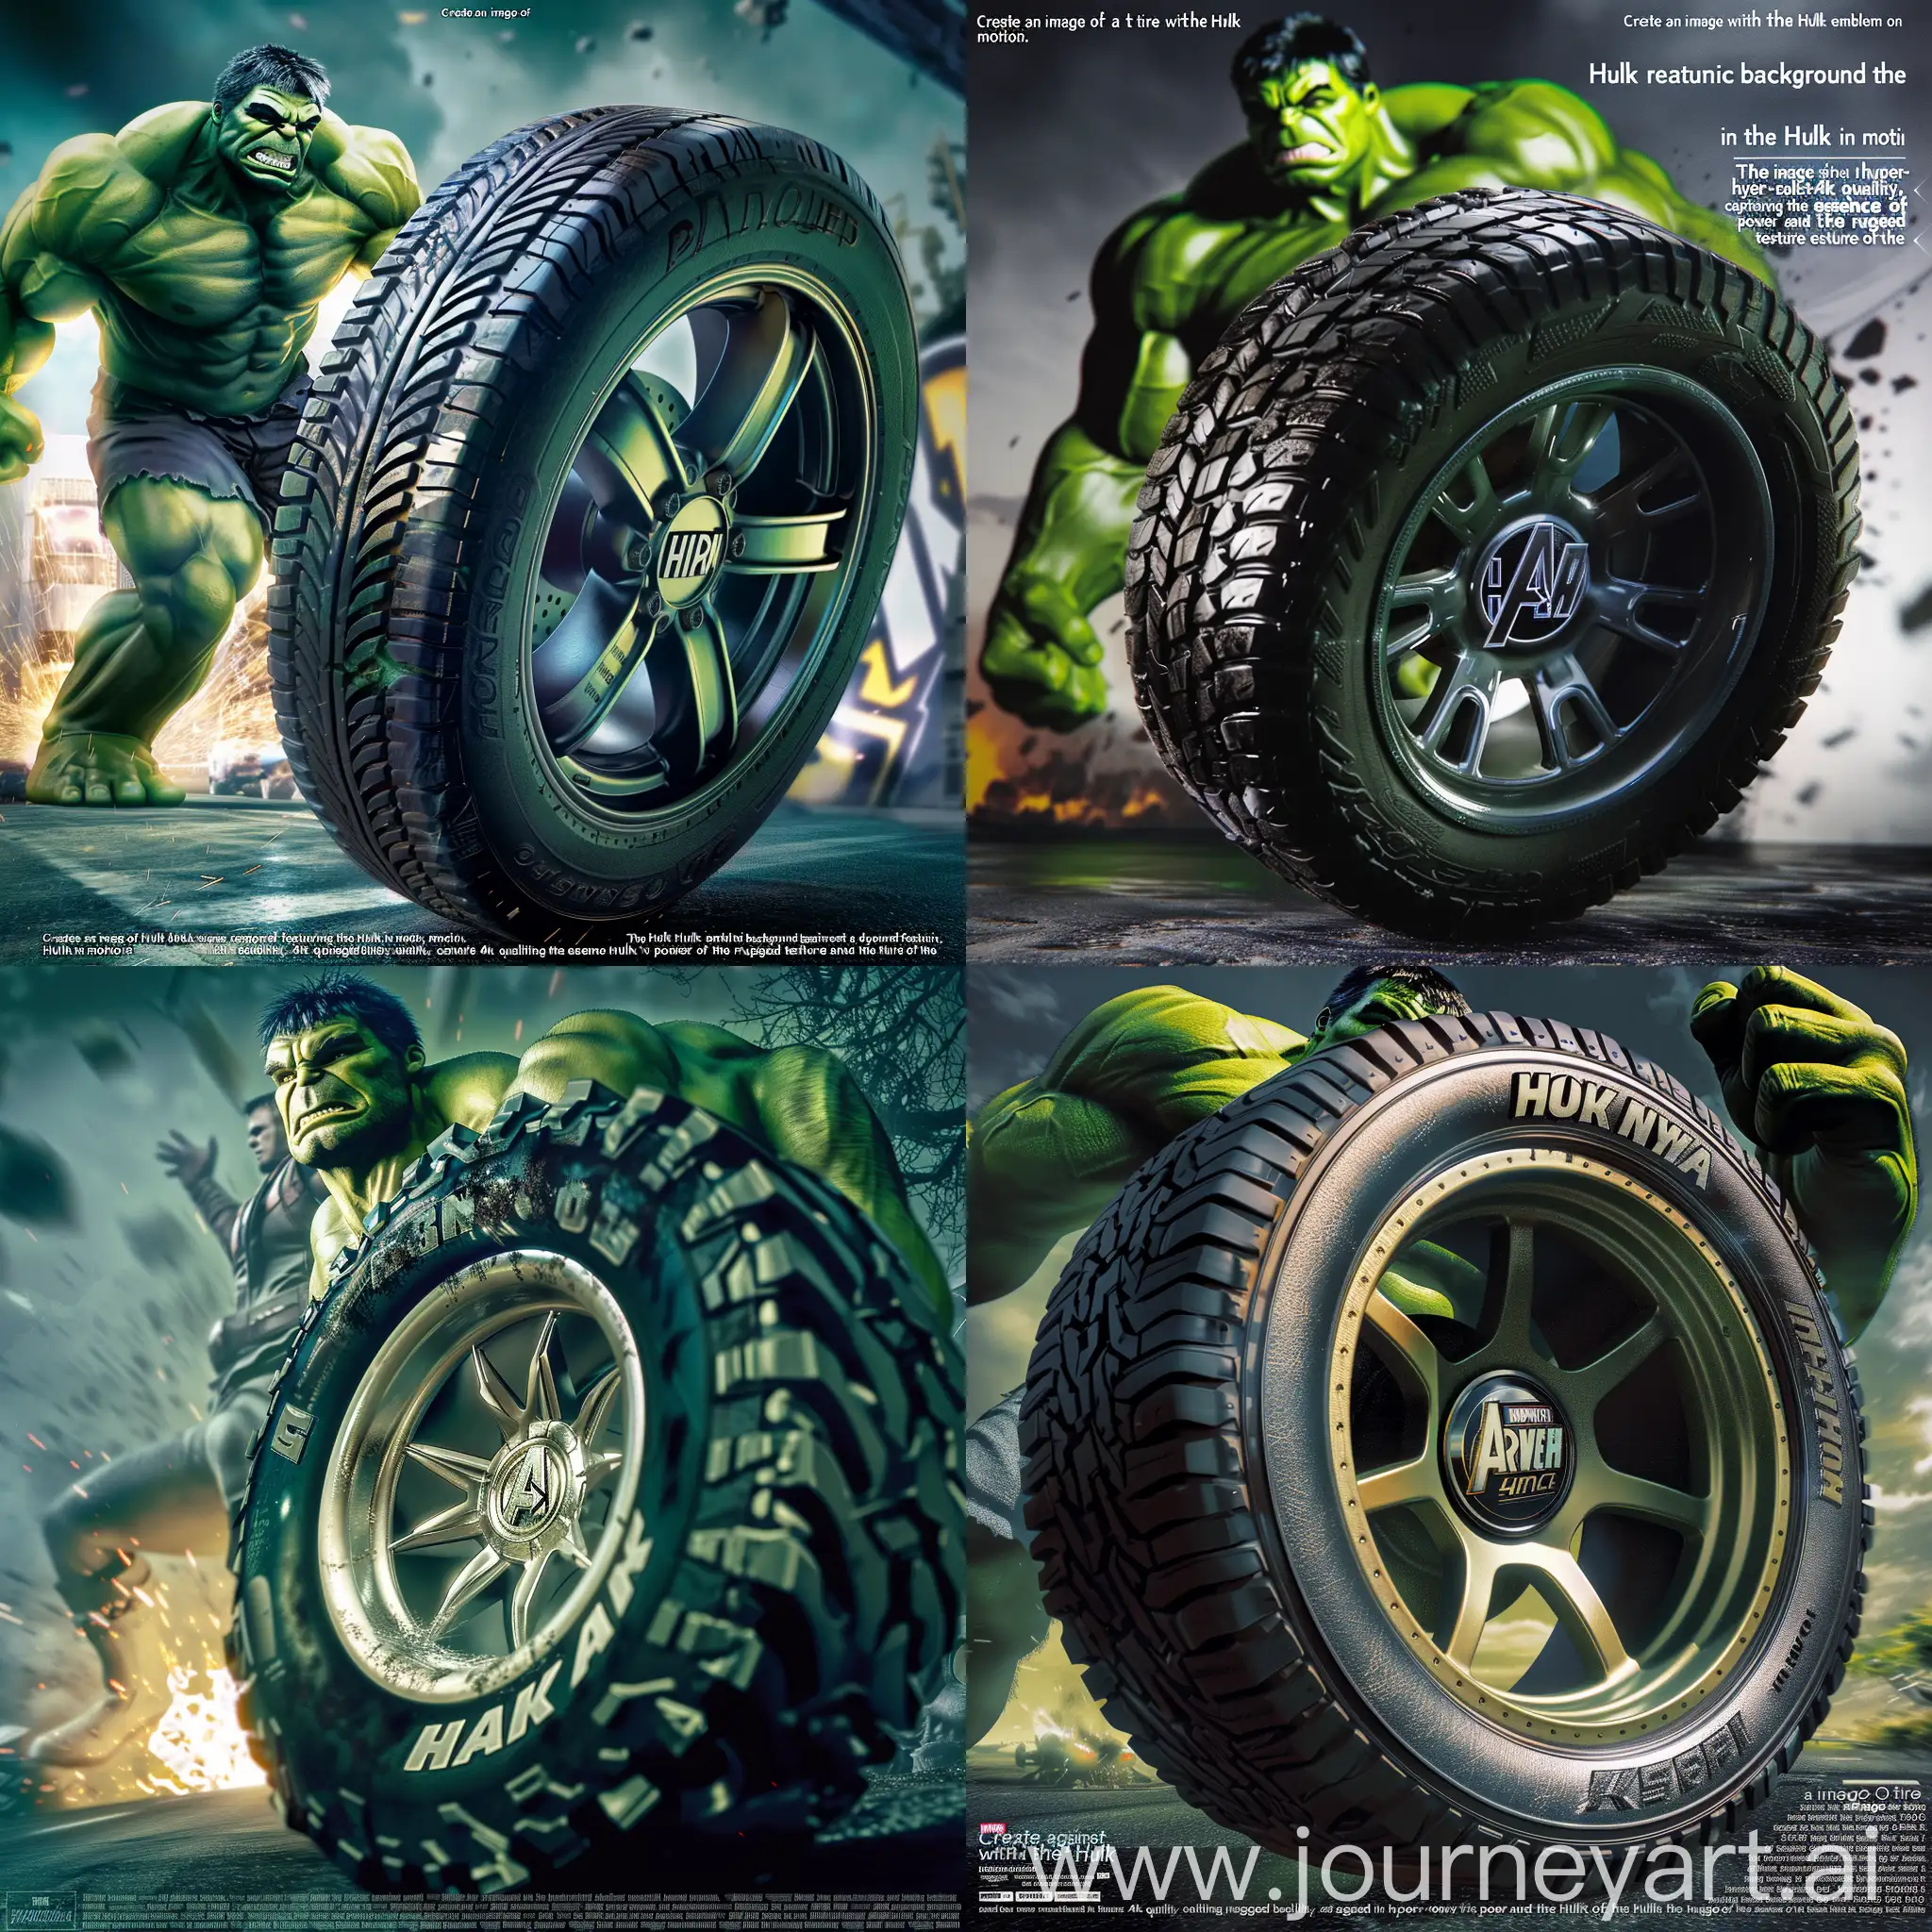 “Create an image of a tire with the Hulk emblem on the rim, set against a dynamic background featuring the Hulk in motion. The image should be rendered in hyper-realistic 4k quality, capturing the essence of the Hulk’s power and the rugged texture of the tire.”